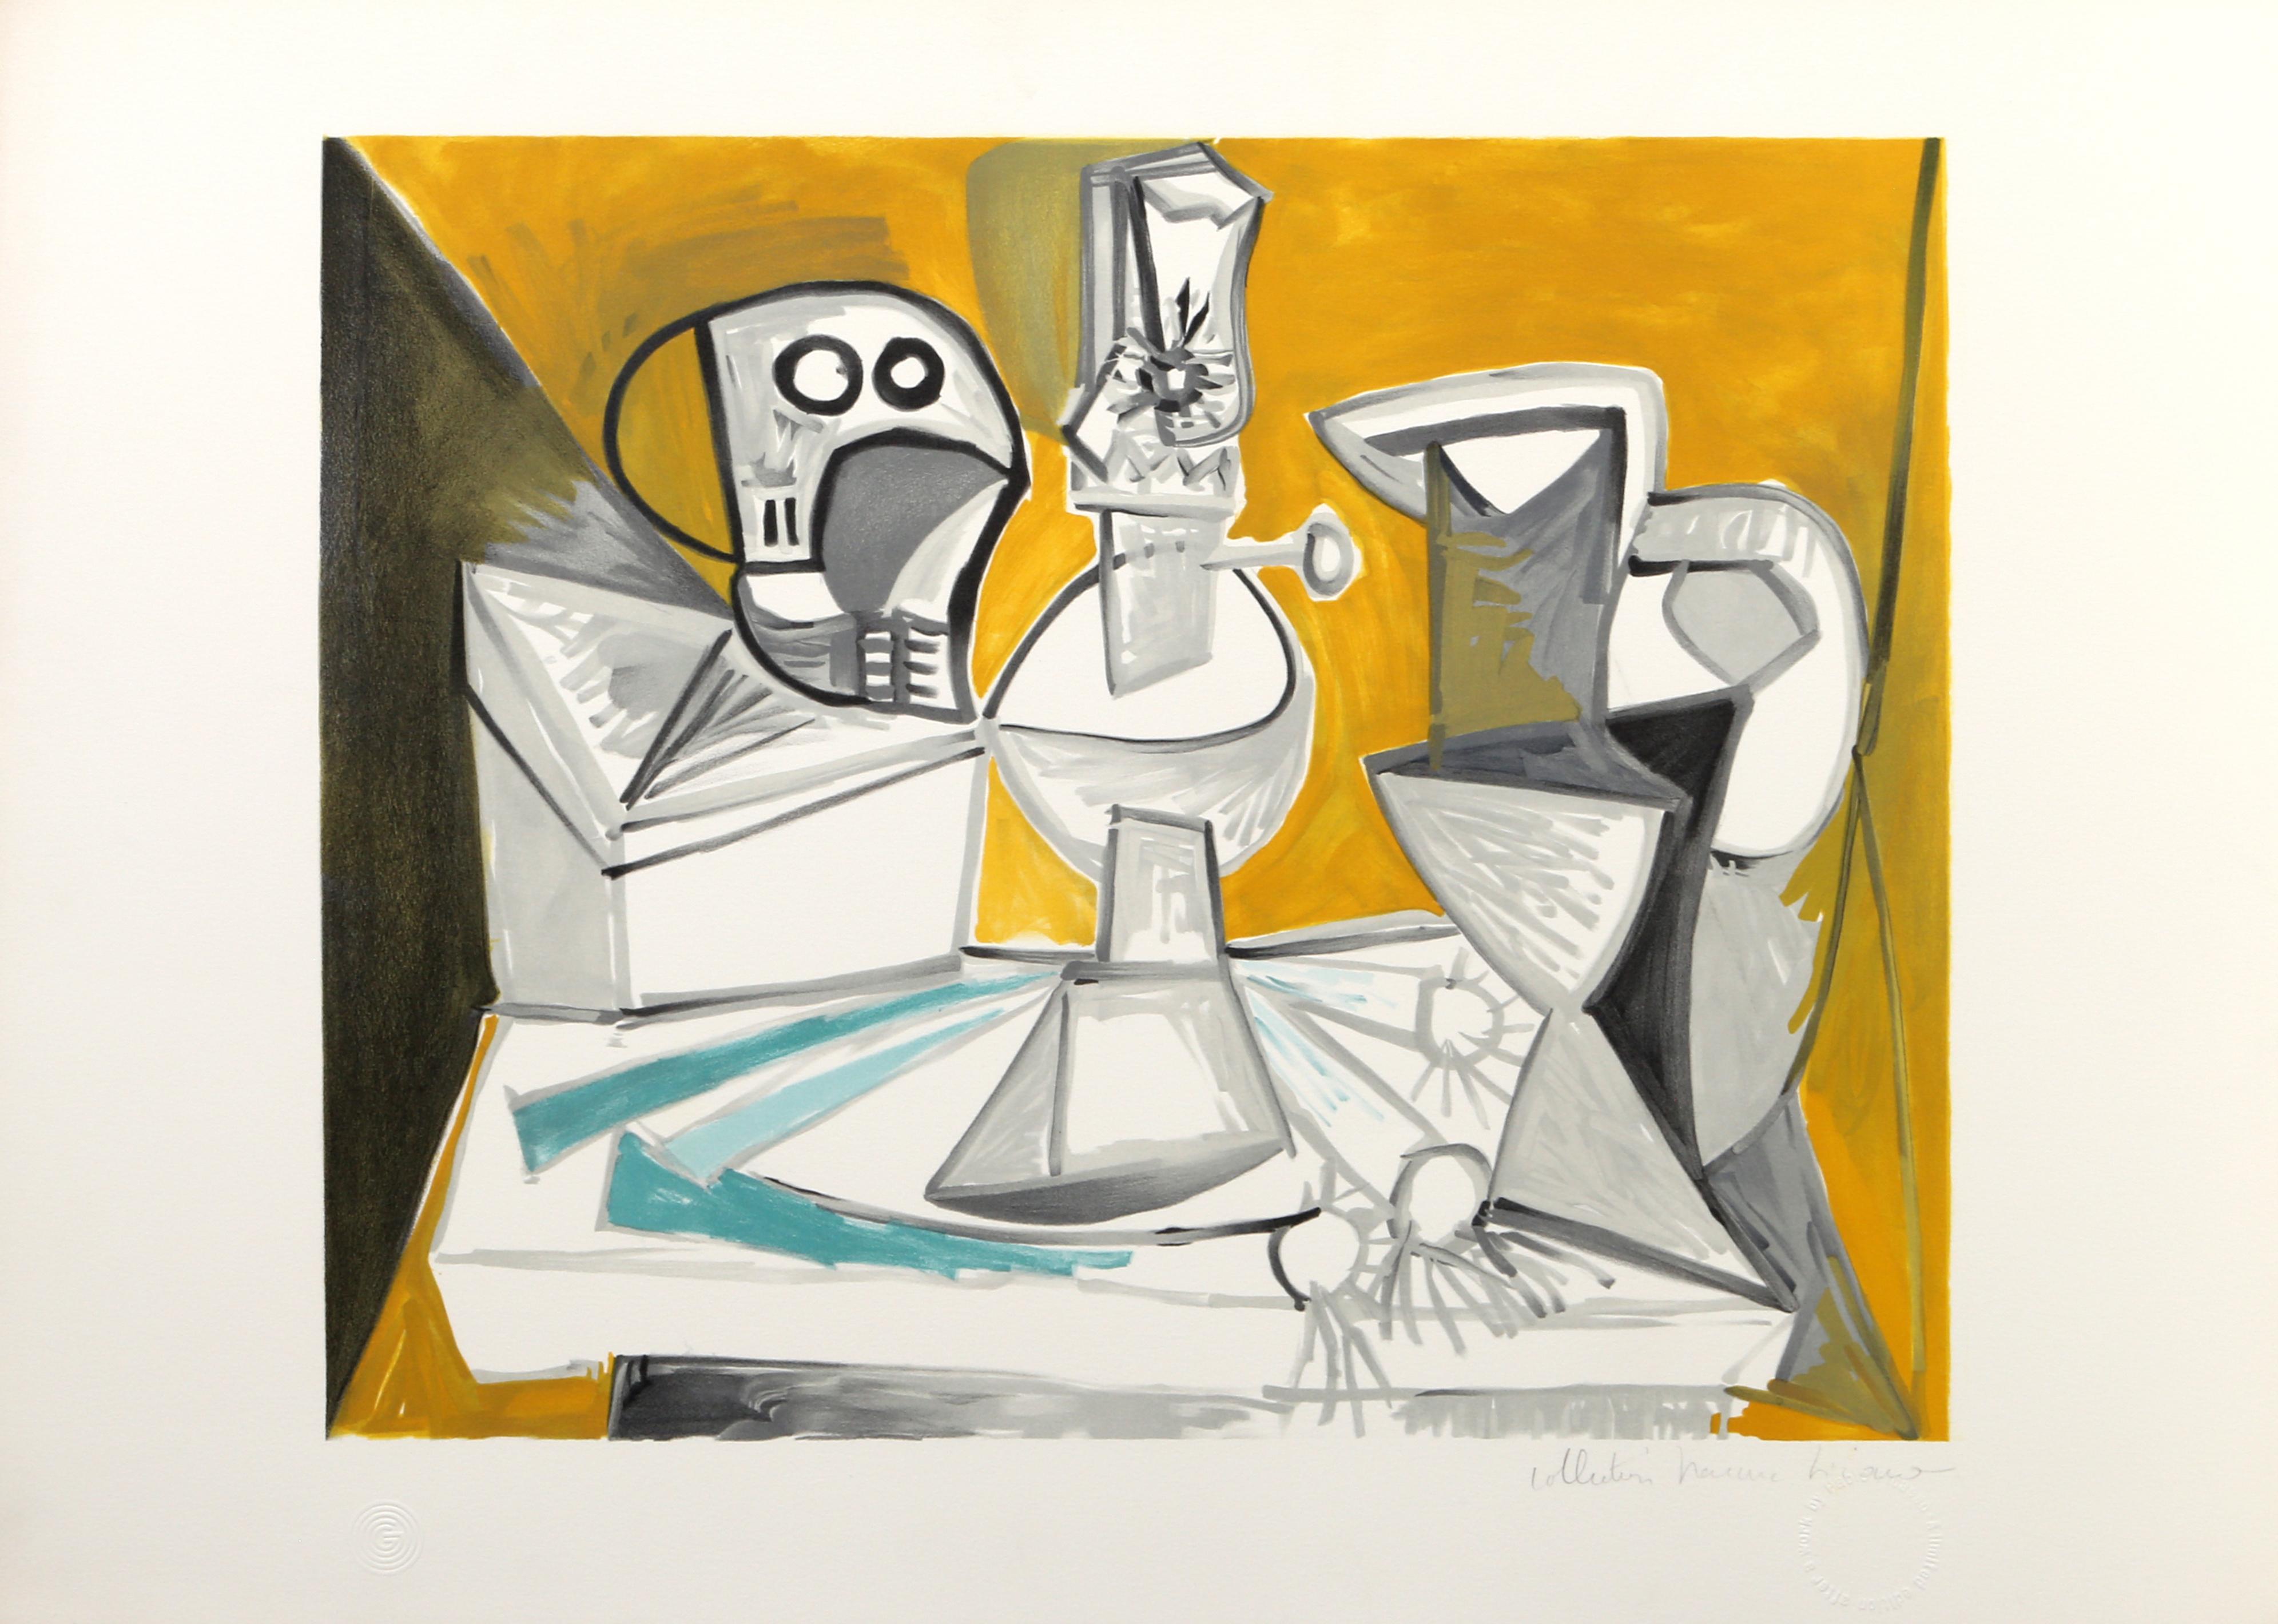 Arranged along a table, the still life displayed in this Pablo Picasso print is bright and luminous. Placed around the lamp at the center, the angular forms of the skull, leeks, and water jugs are plastered in white and grey while the background is